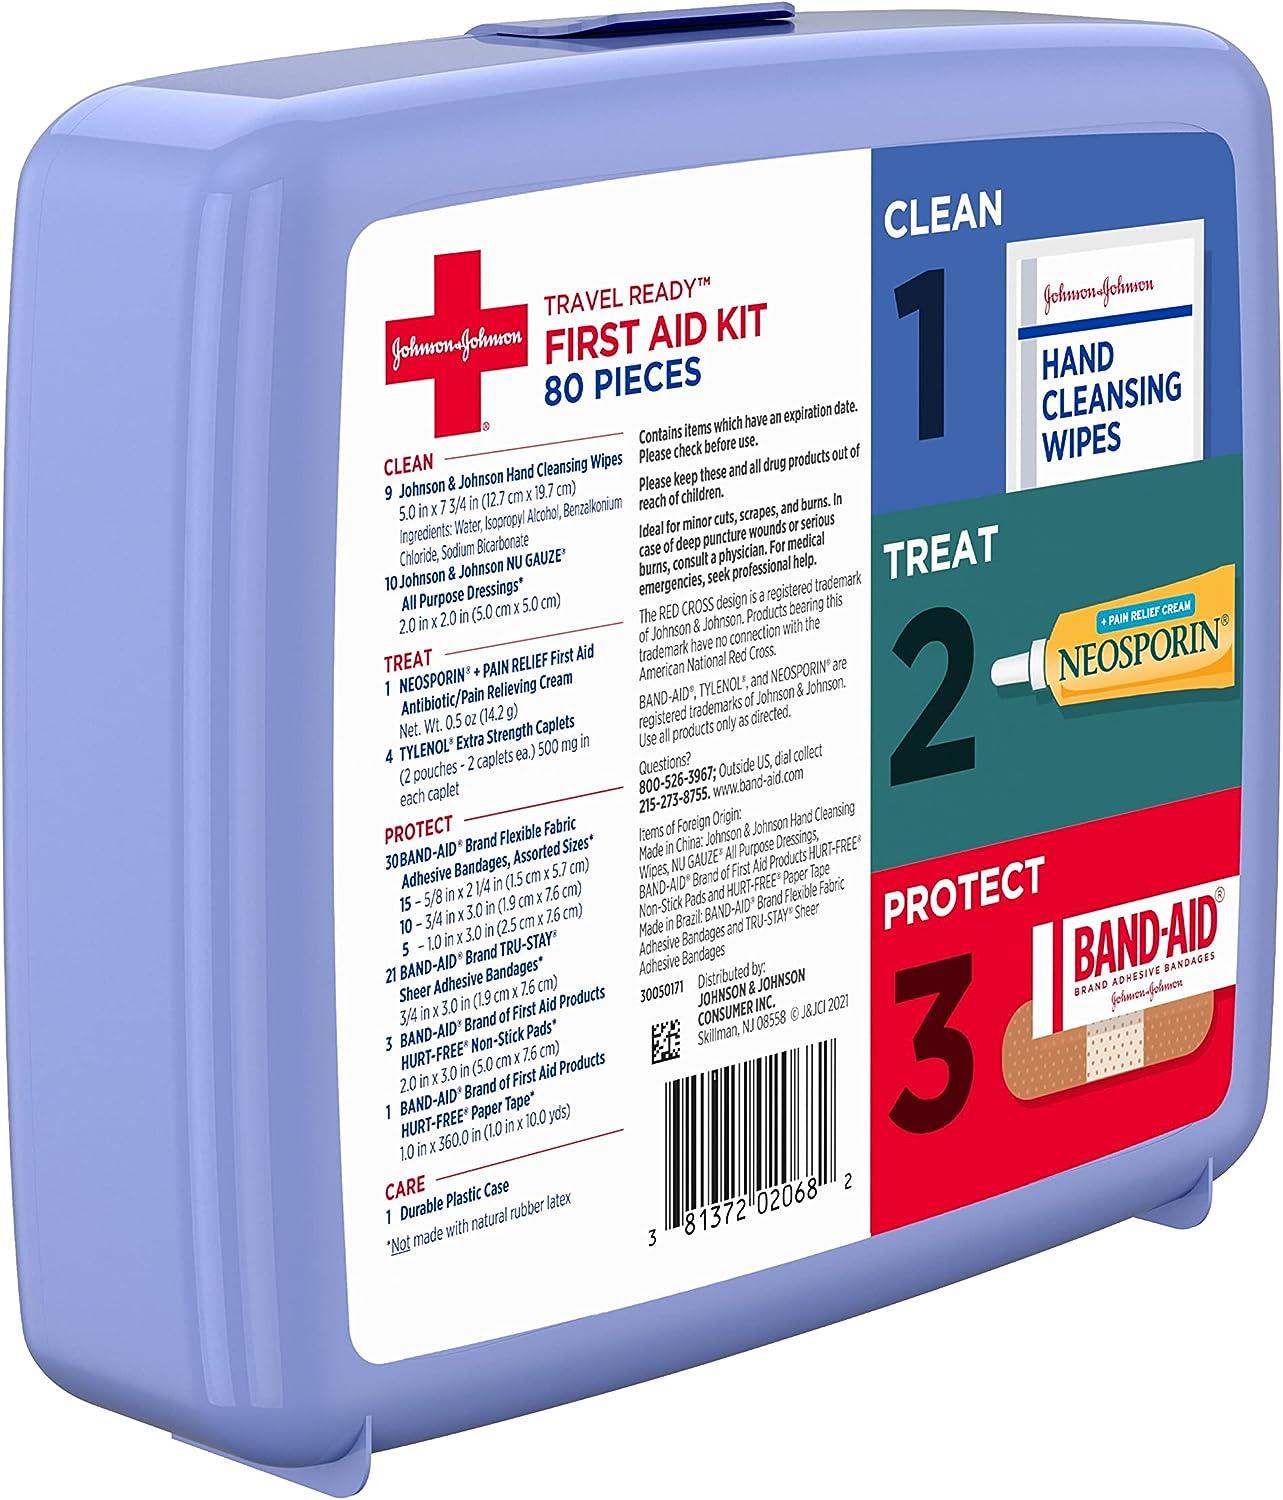 Johnson & Johnson Travel Ready Portable Emergency First Aid Kit for Minor  Wound Care with Assorted Adhesive Bandages, Gauze Pads & More, Ideal for  Travel, Car & On-The-Go, 80 pc